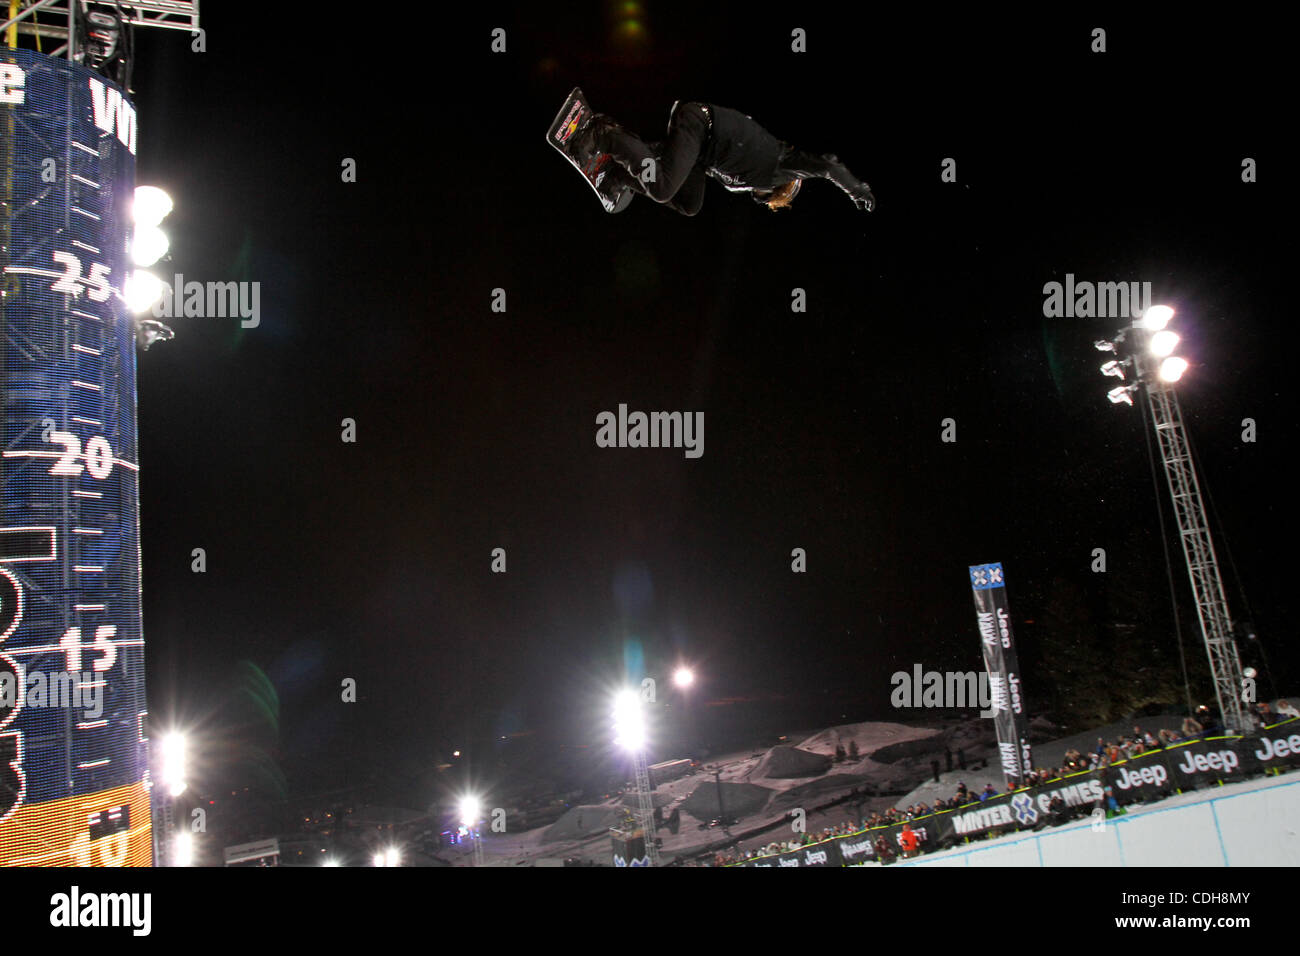 Jan. 30, 2011 - Aspen, Colorado, U.S. - Shaun White took home the gold for the fourth year in a row at the Winter X-Games Men's Superpipe. (Credit Image: © Rustin Gudim/ZUMAPRESS.com) Stock Photo